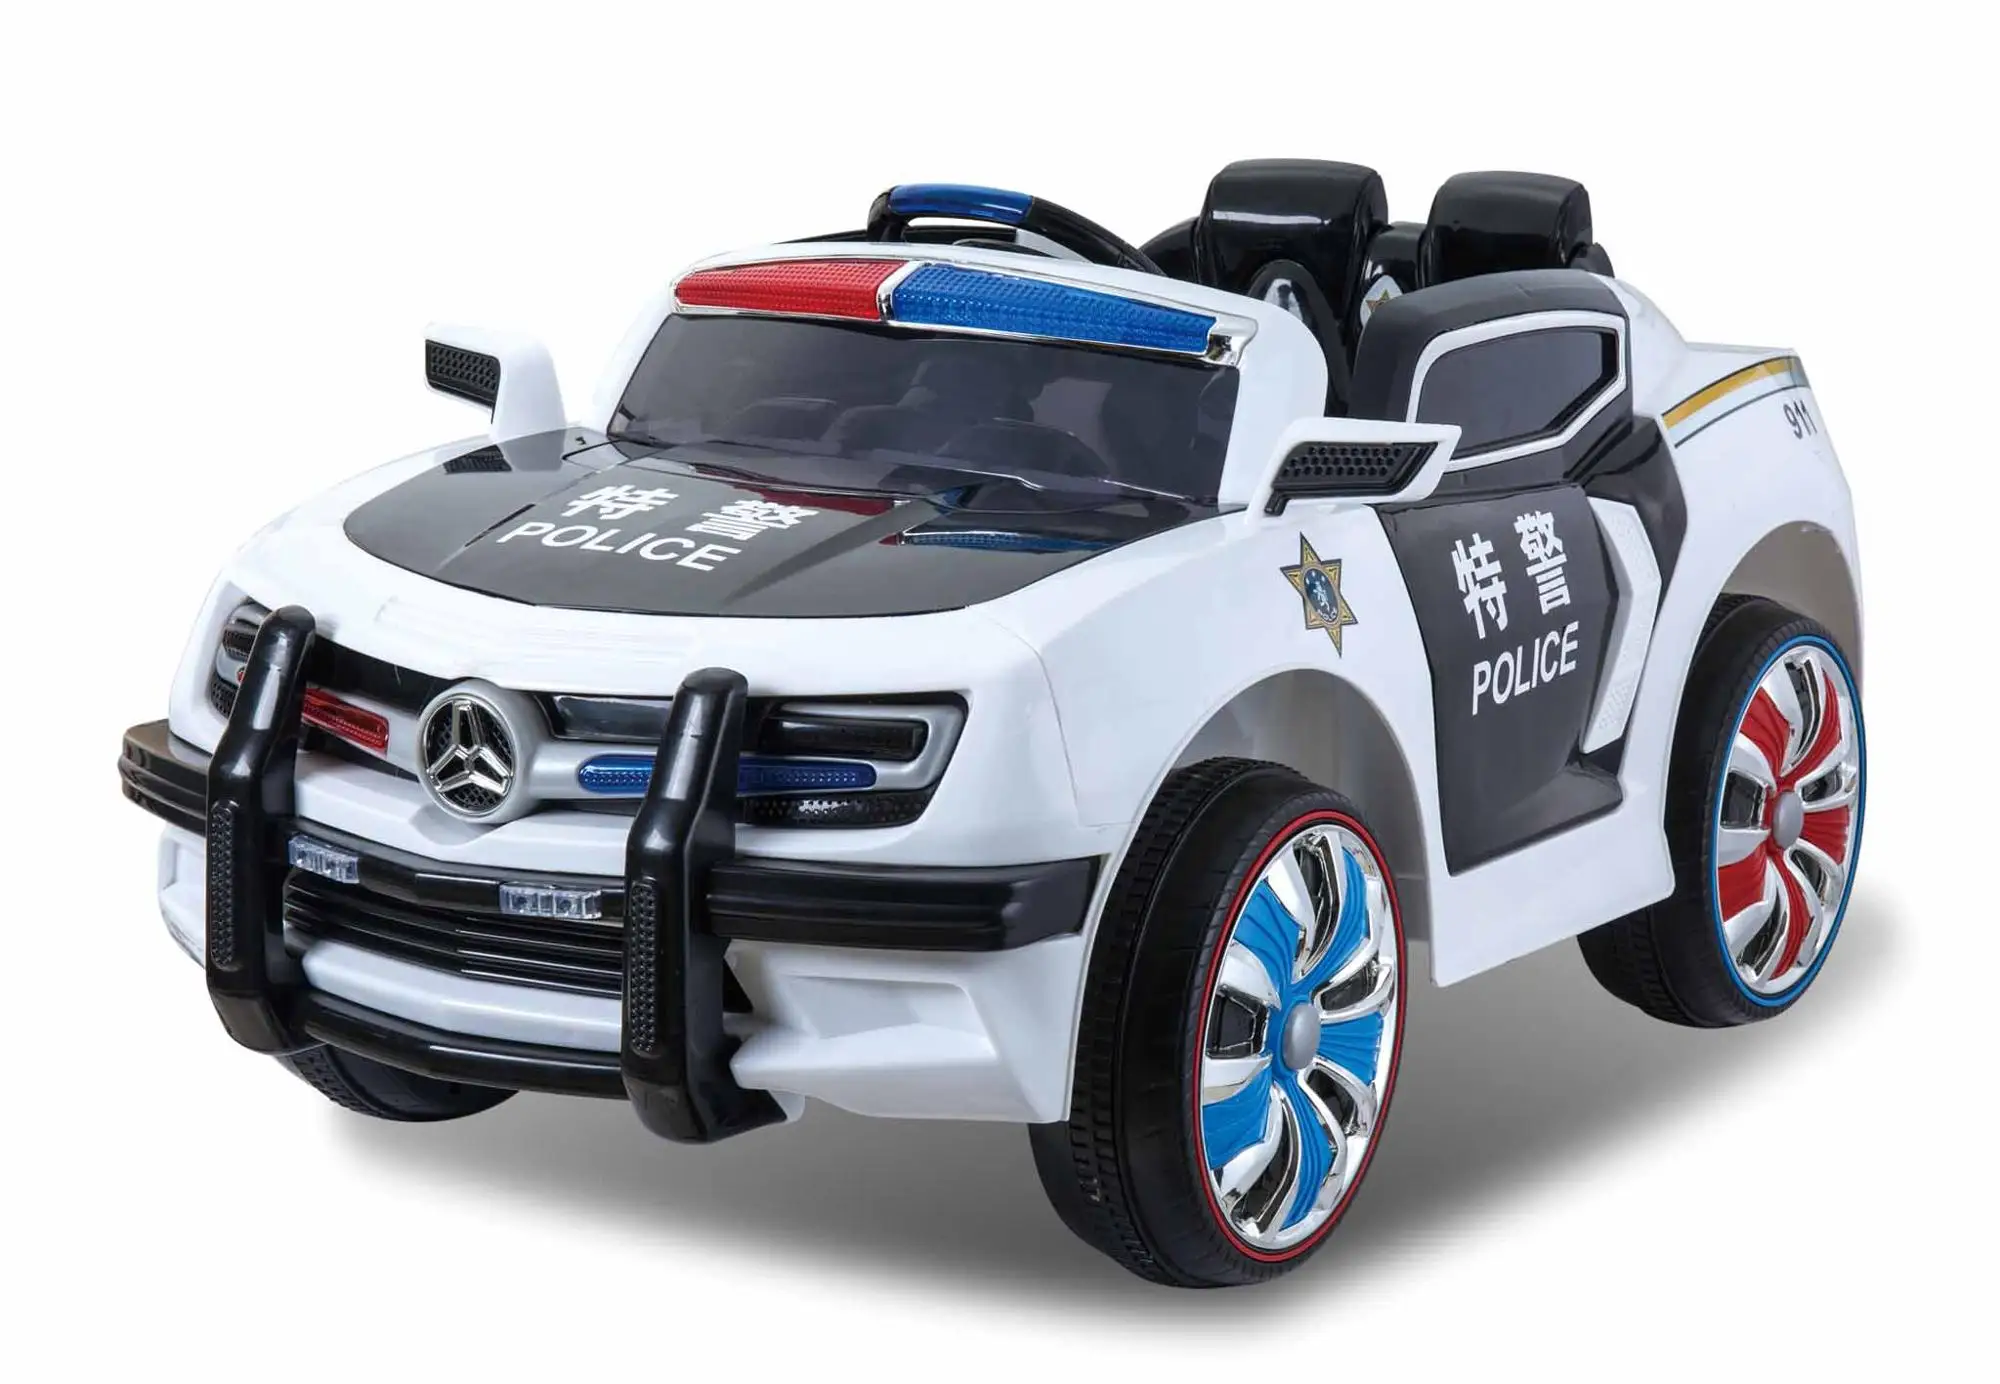 police toy car for kids